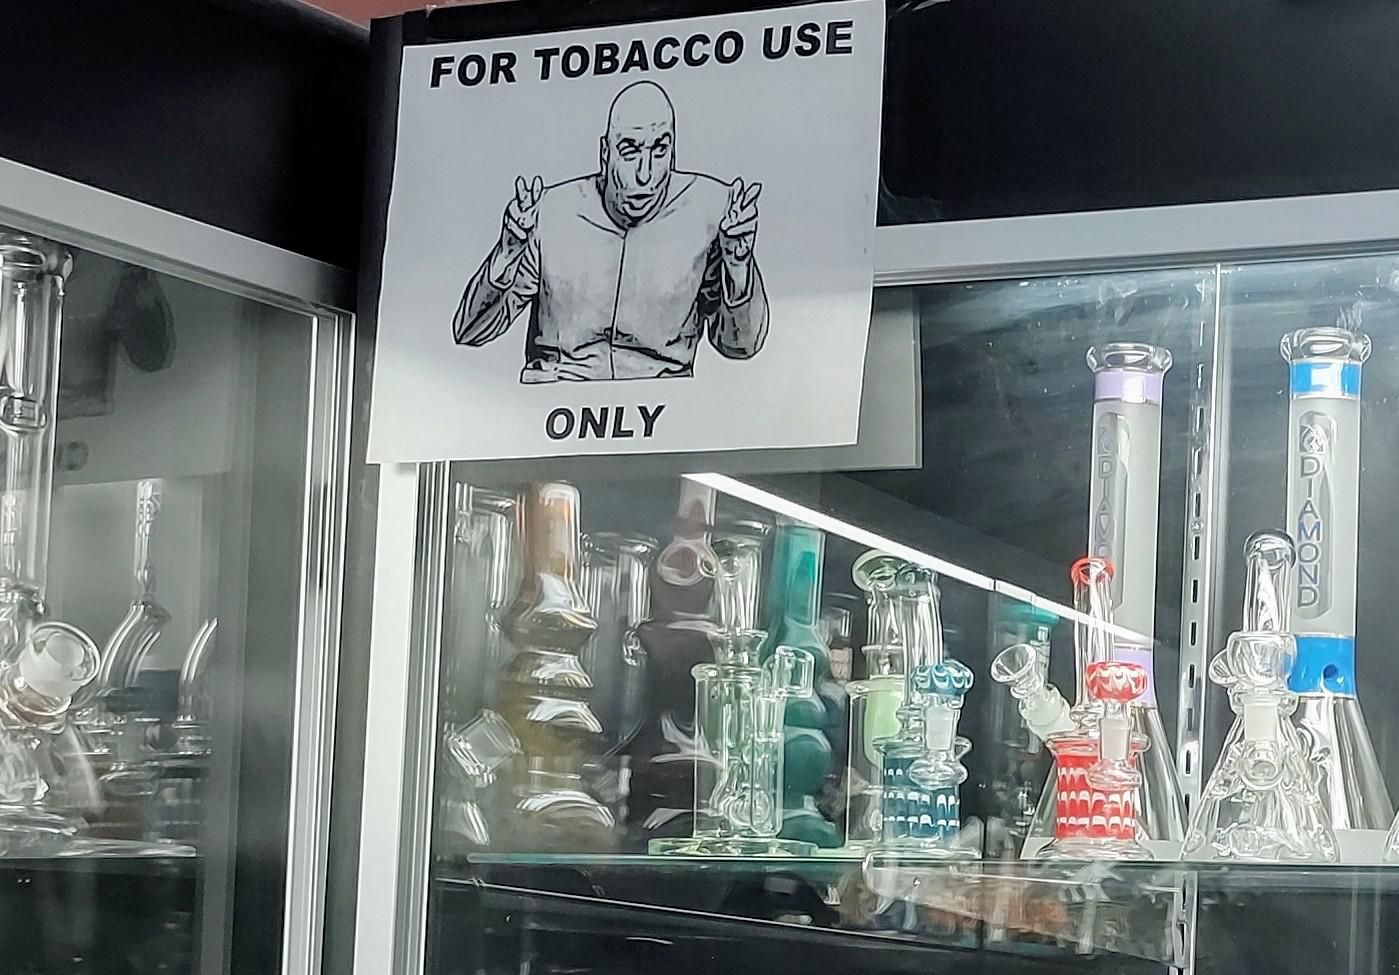 For "Tobacco" Use Only